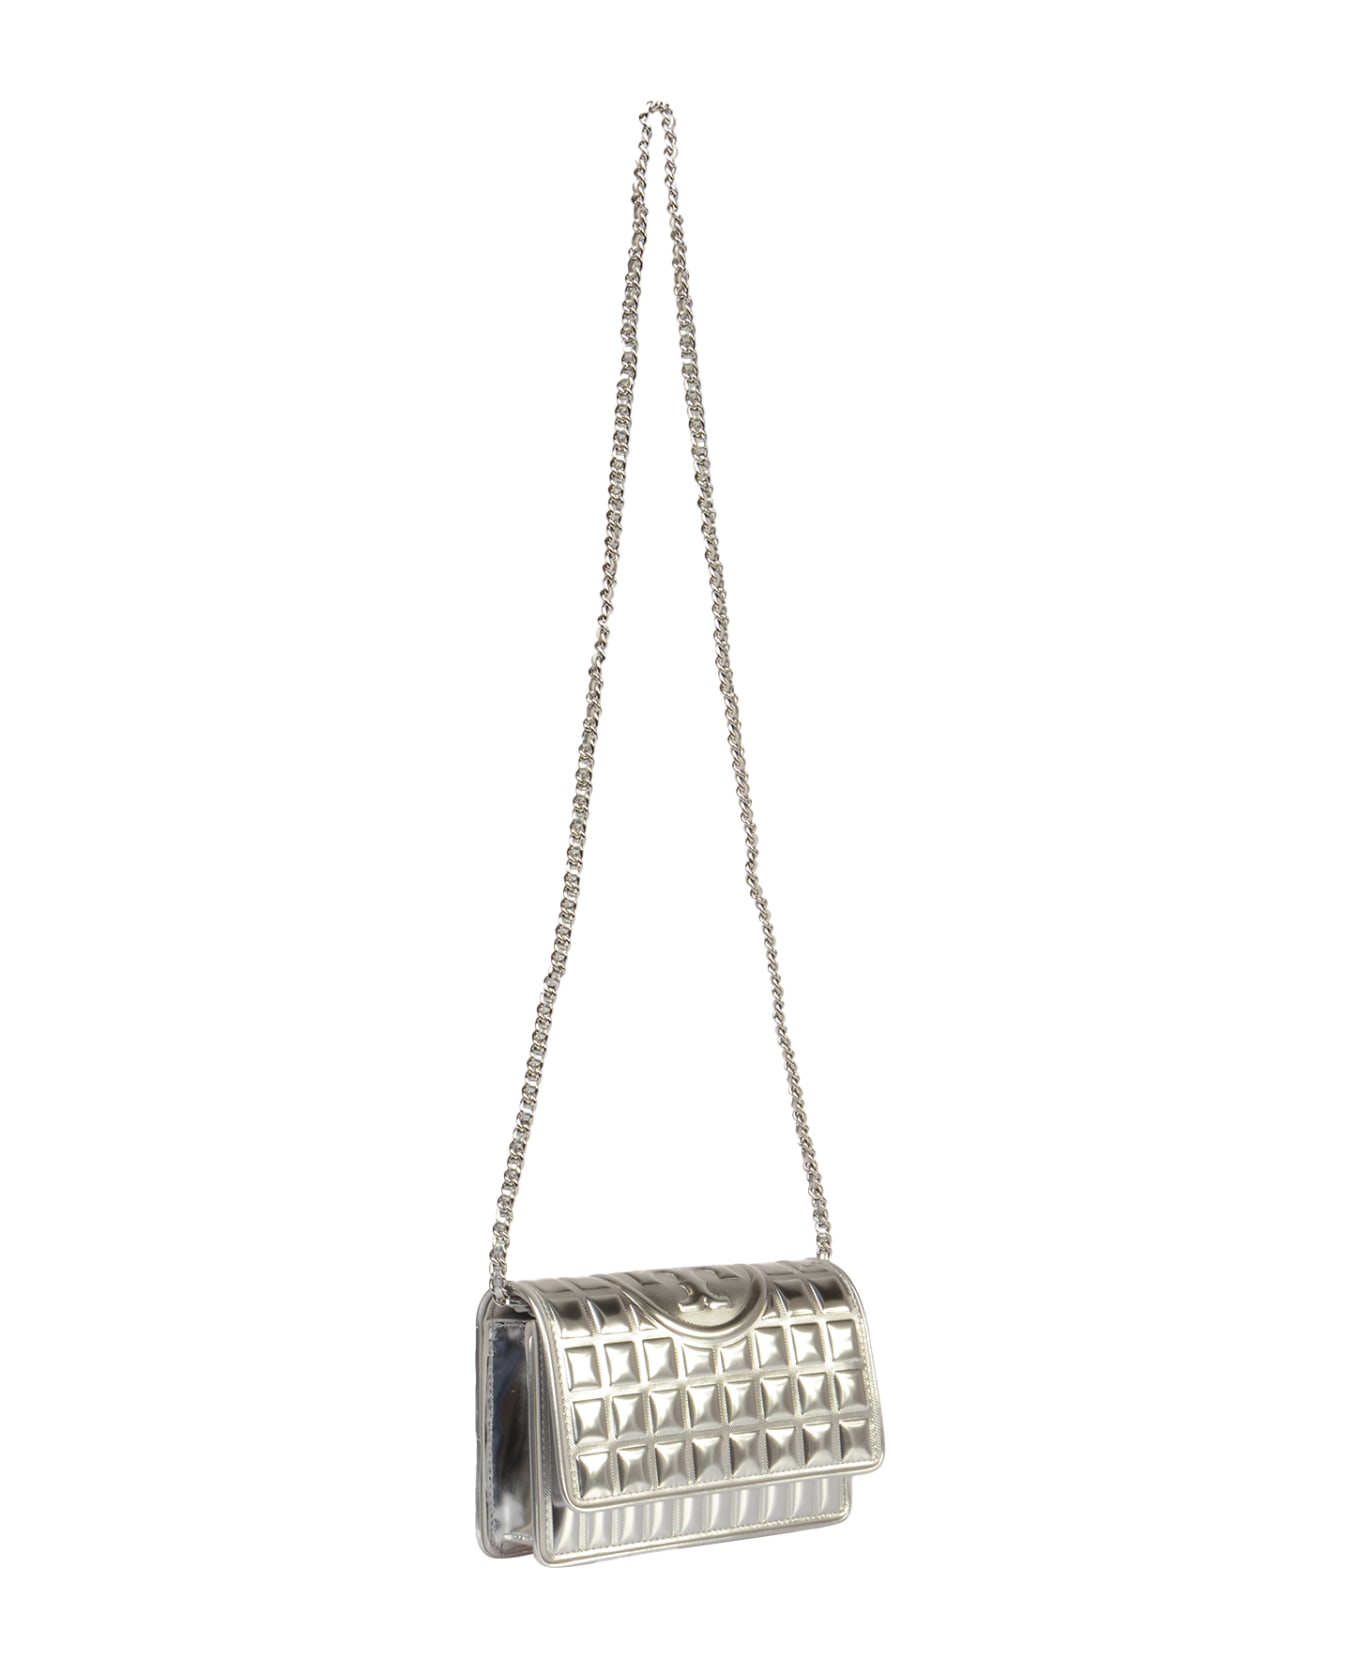 Tory Burch Flewing Soft Metallic Quilt Chain Clutch - Silver クラッチバッグ